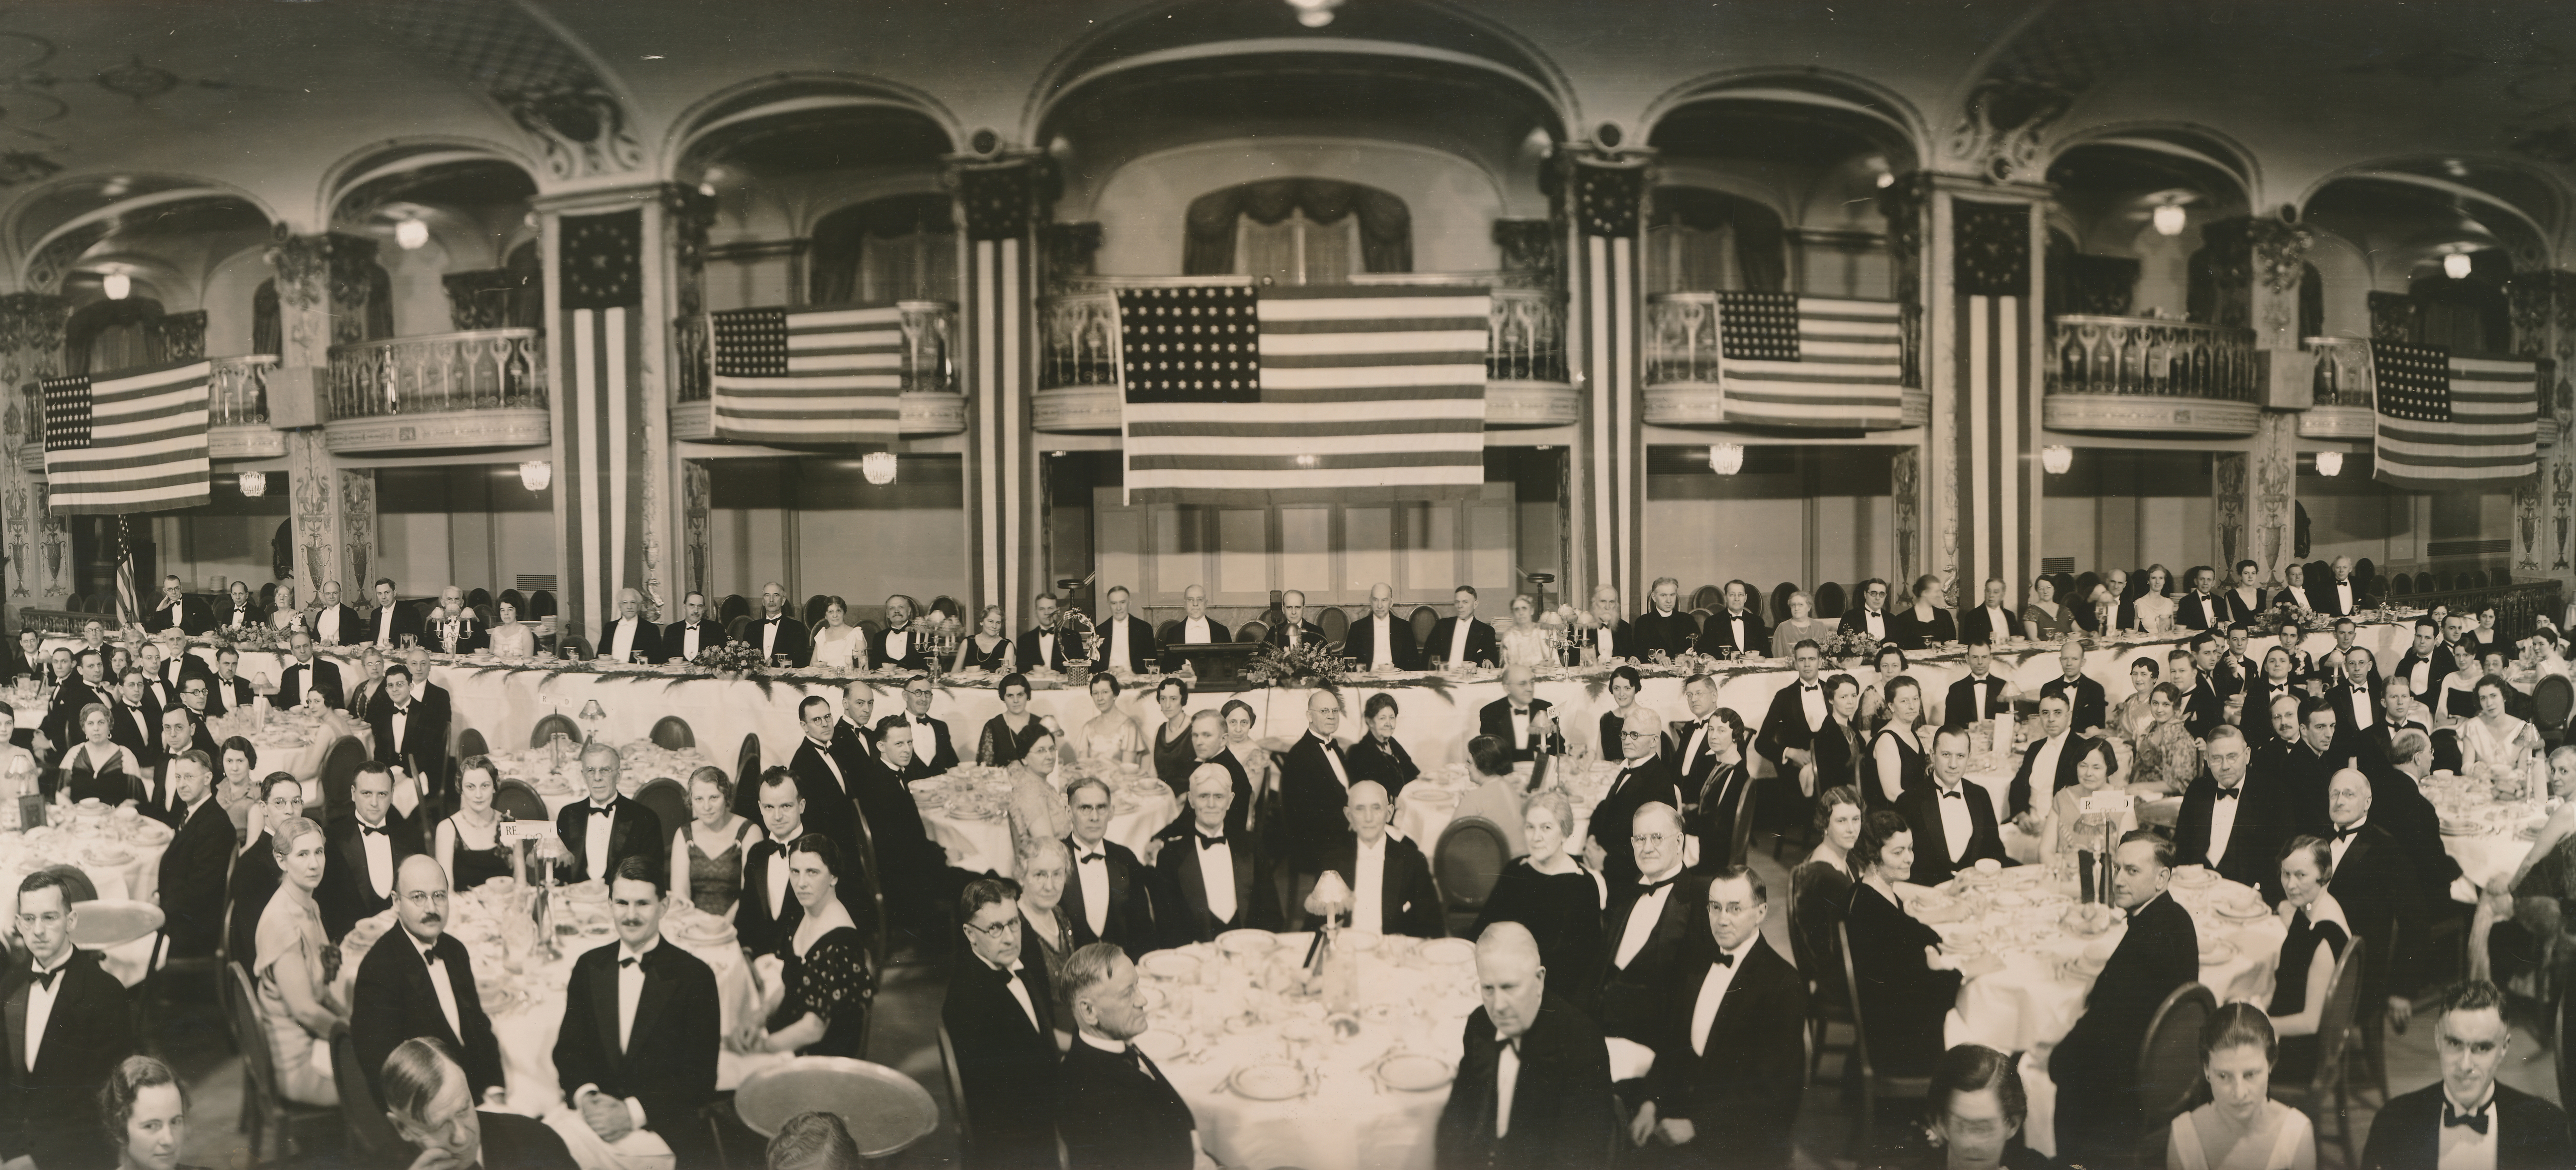 In 1934, the AHA celebrated its 50th anniversary in Washington, DC, with a “Founders Dinner.”